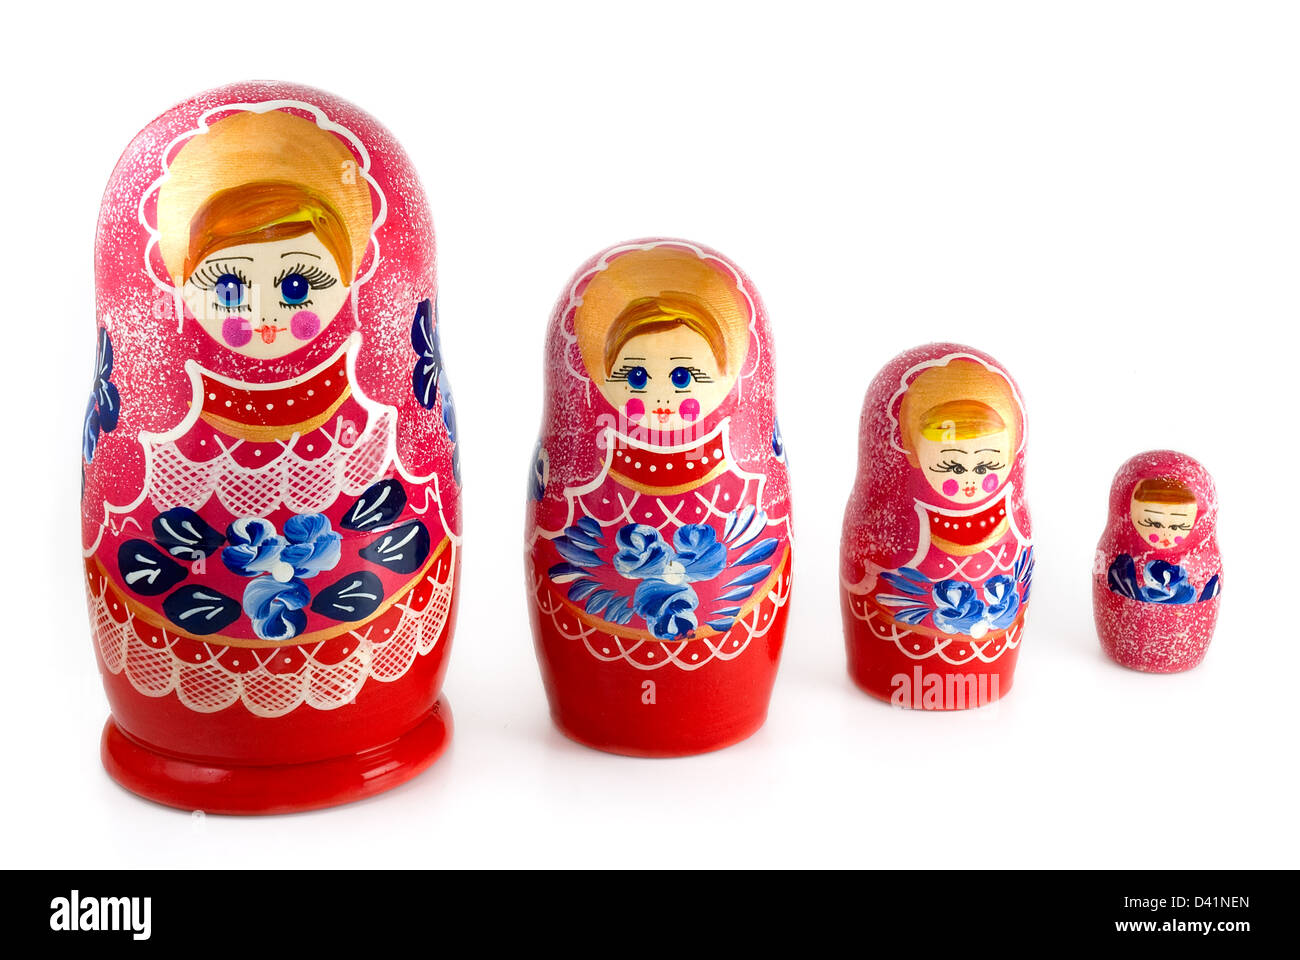 Russian nested dolls are photographed on white Stock Photo